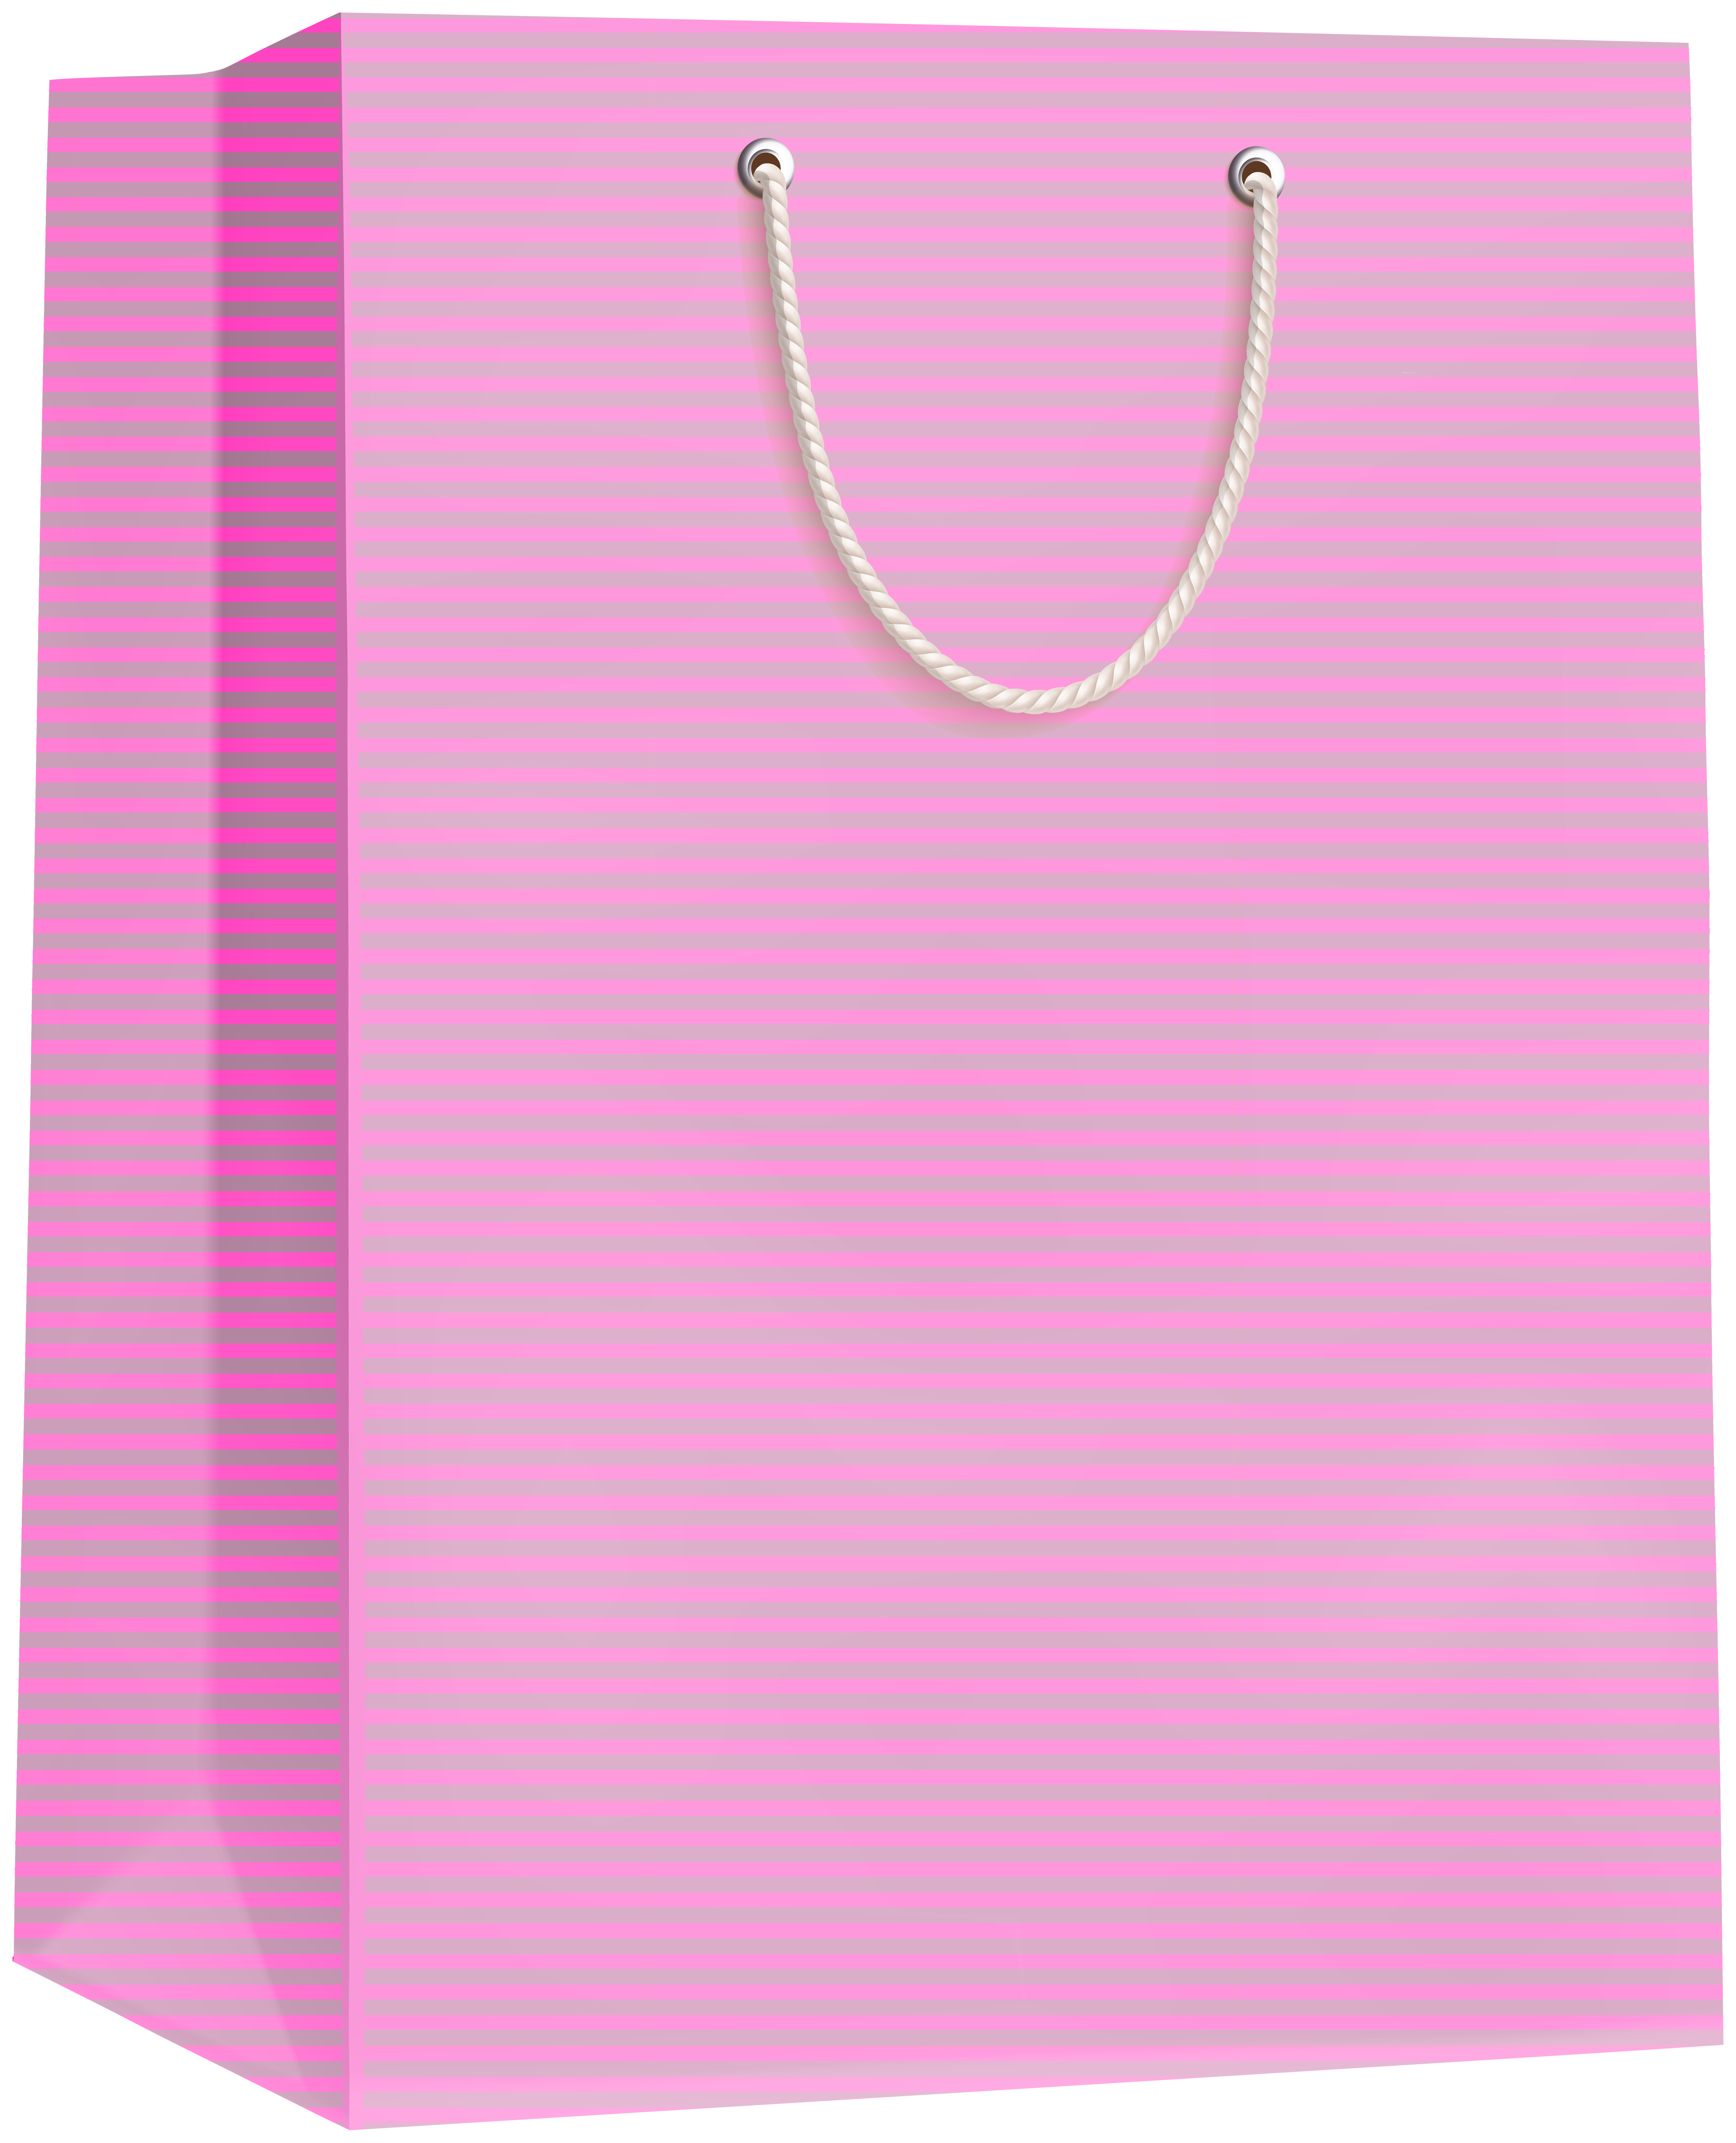 Gift Bag Pink PNG Clipart​  Gallery Yopriceville - High-Quality Free  Images and Transparent PNG Clipart